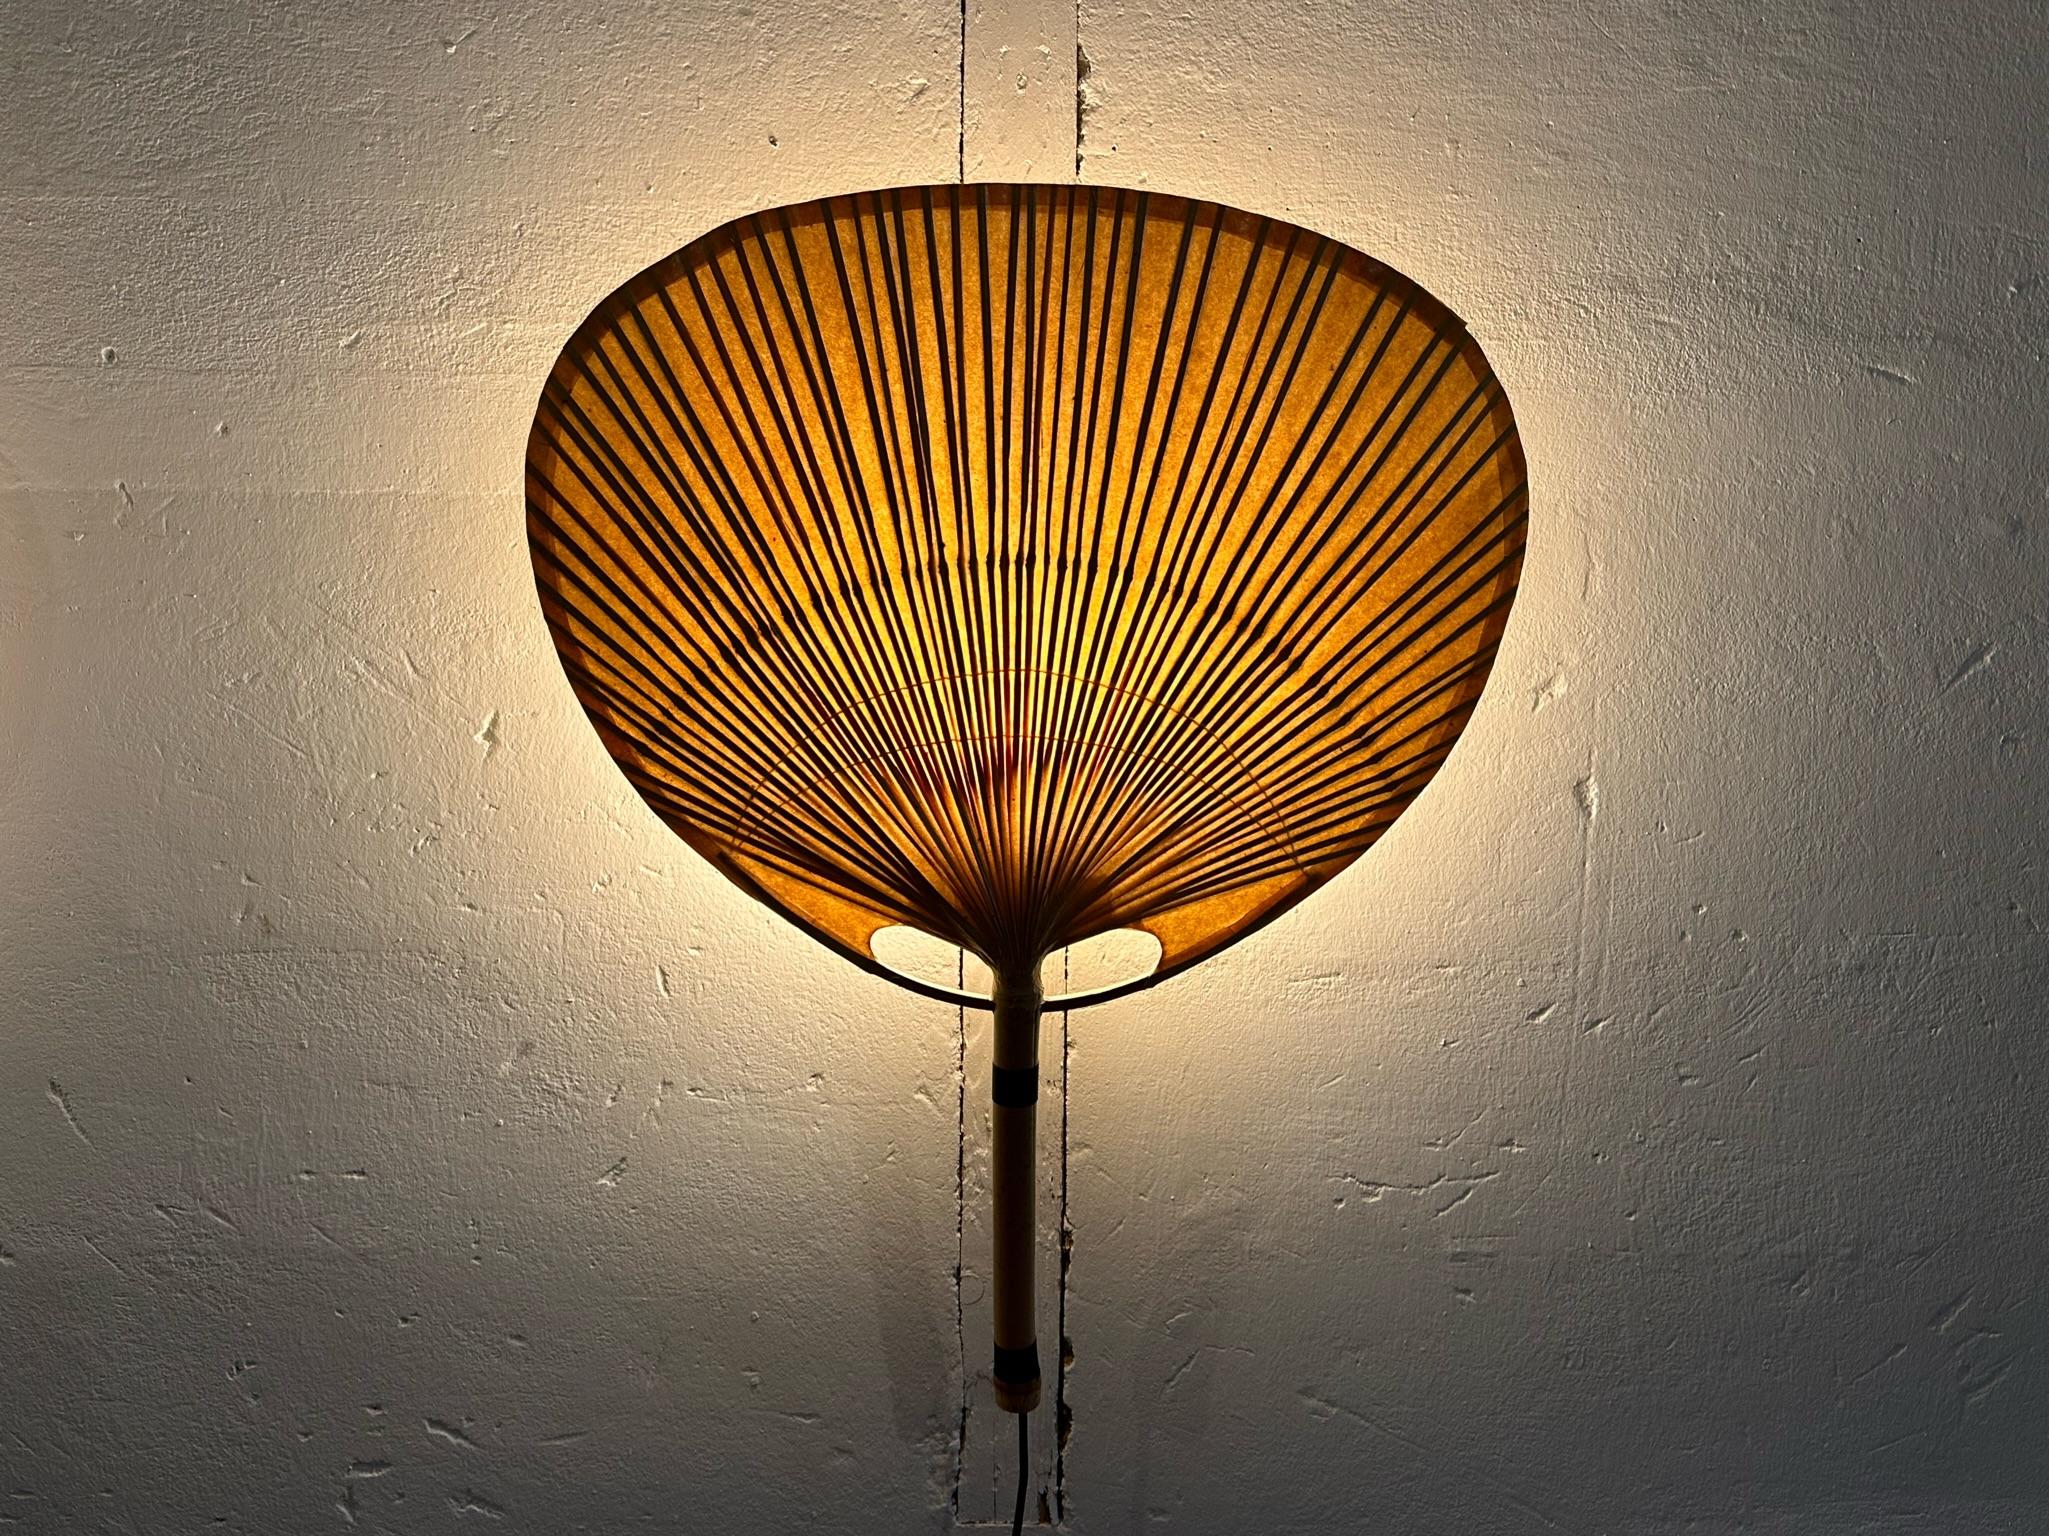 Incredibl model Uchiwa 3 wall scone designed by Ingo Maurer, Germany 1973. The shades, made of bamboo and rice paper, give off amazing warm light. These lamps are all hand made and one of the most iconic designs by Ingo Maurer. With these beautiful